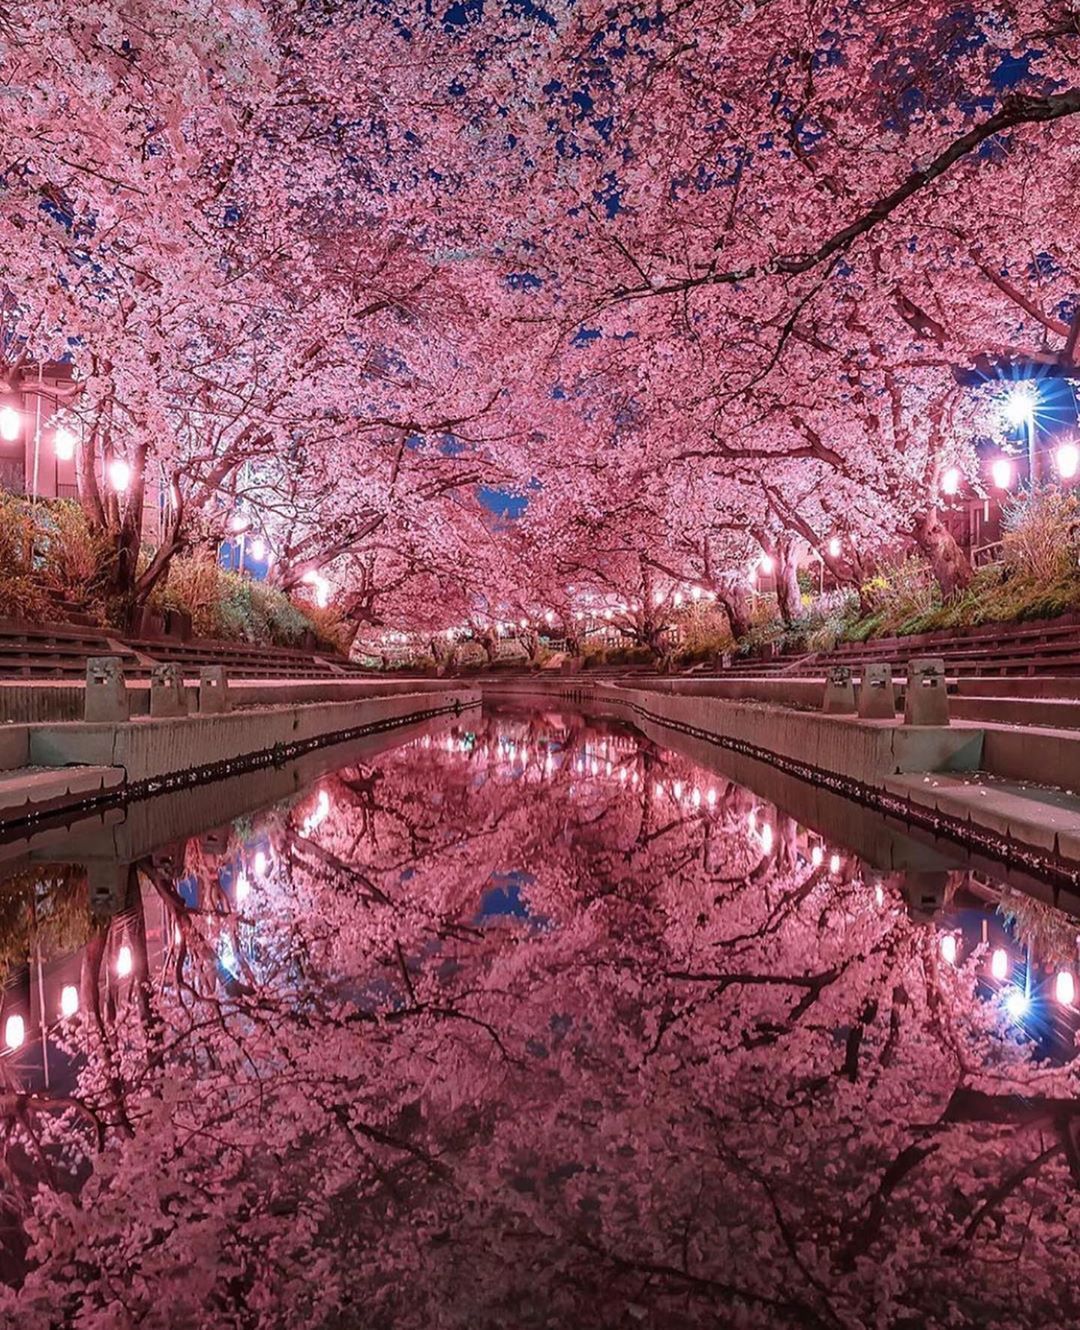 Travel / Hotels / Nature on Instagram: “Cherry blossoms in Japan